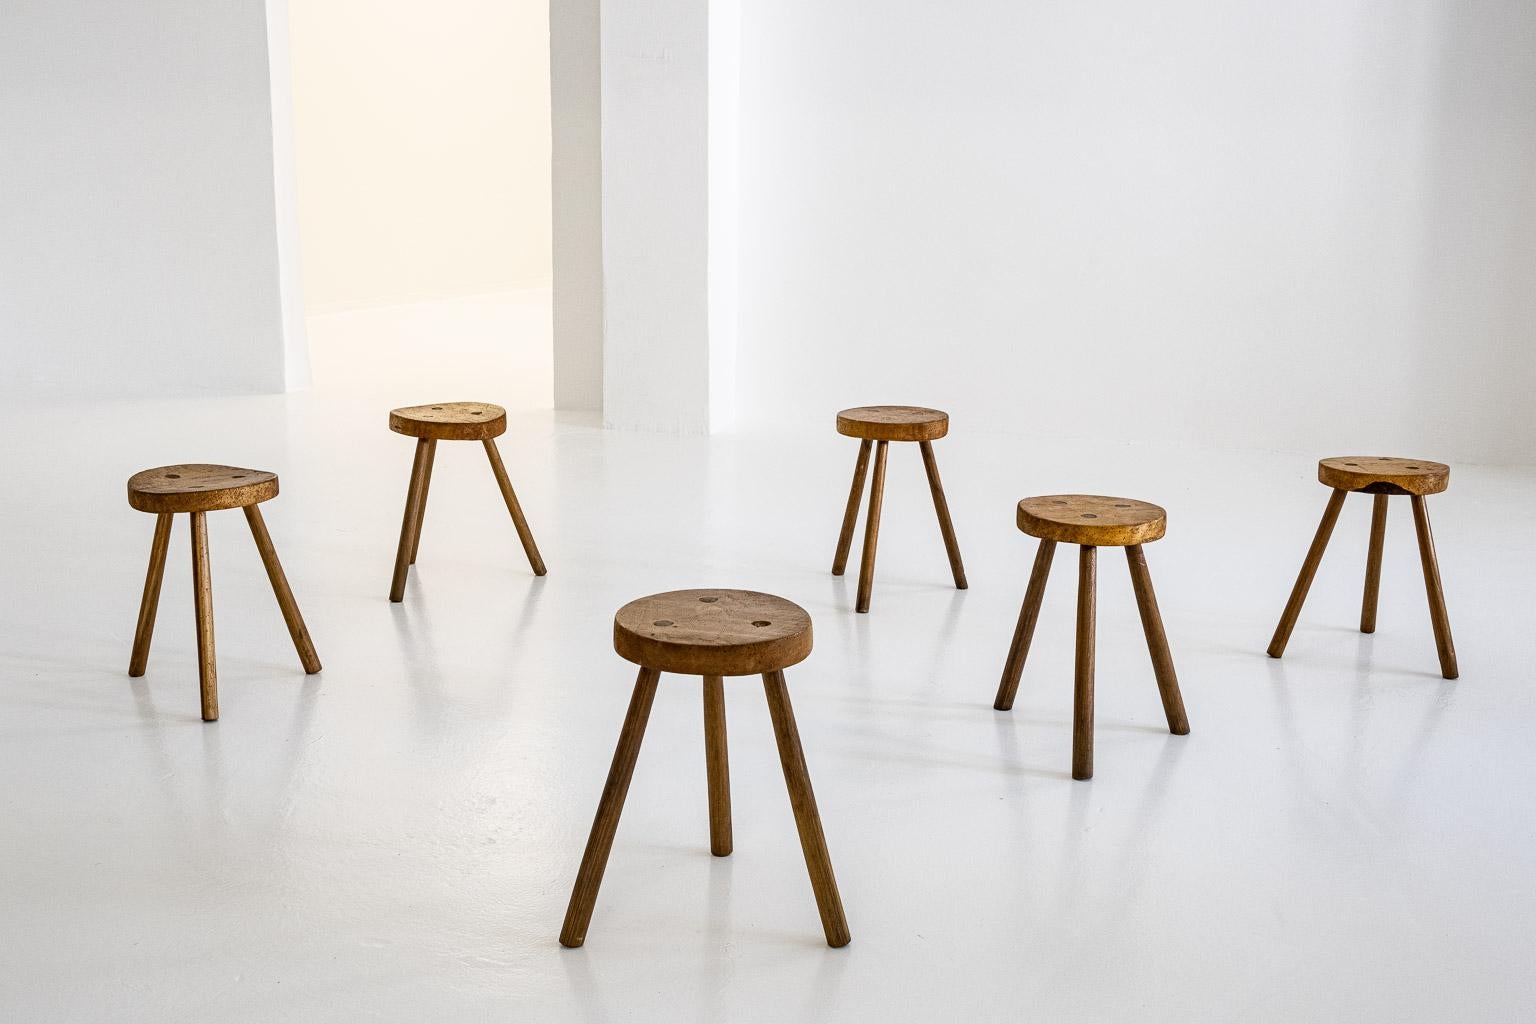 20th Century Set of 6, Wooden, Brutalist Tripod Stools or Side Tables, Italy, ca. 1960s For Sale